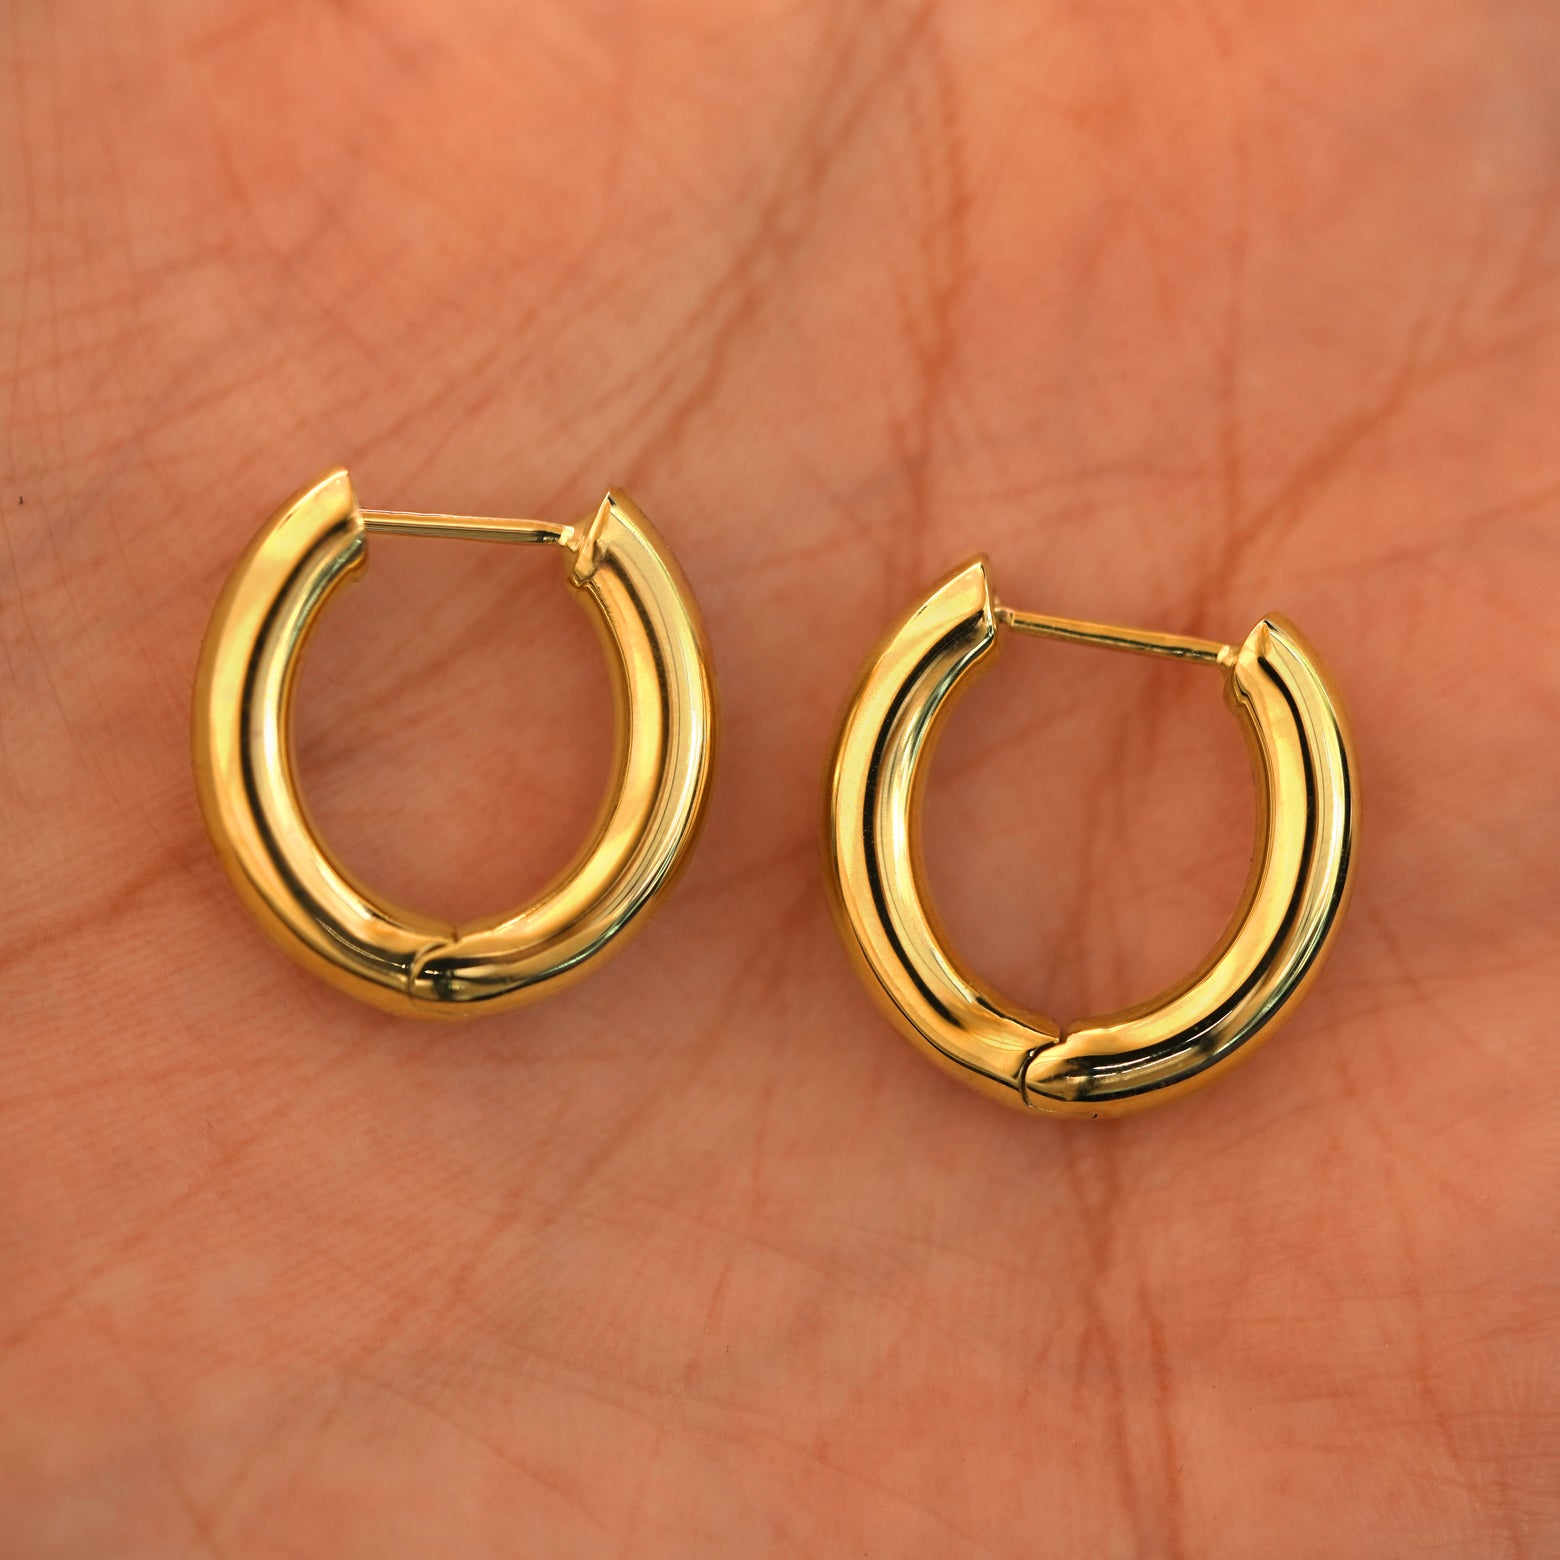 A pair of 14k yellow gold Chunky Oval Huggie Hoops resting in a model's palm